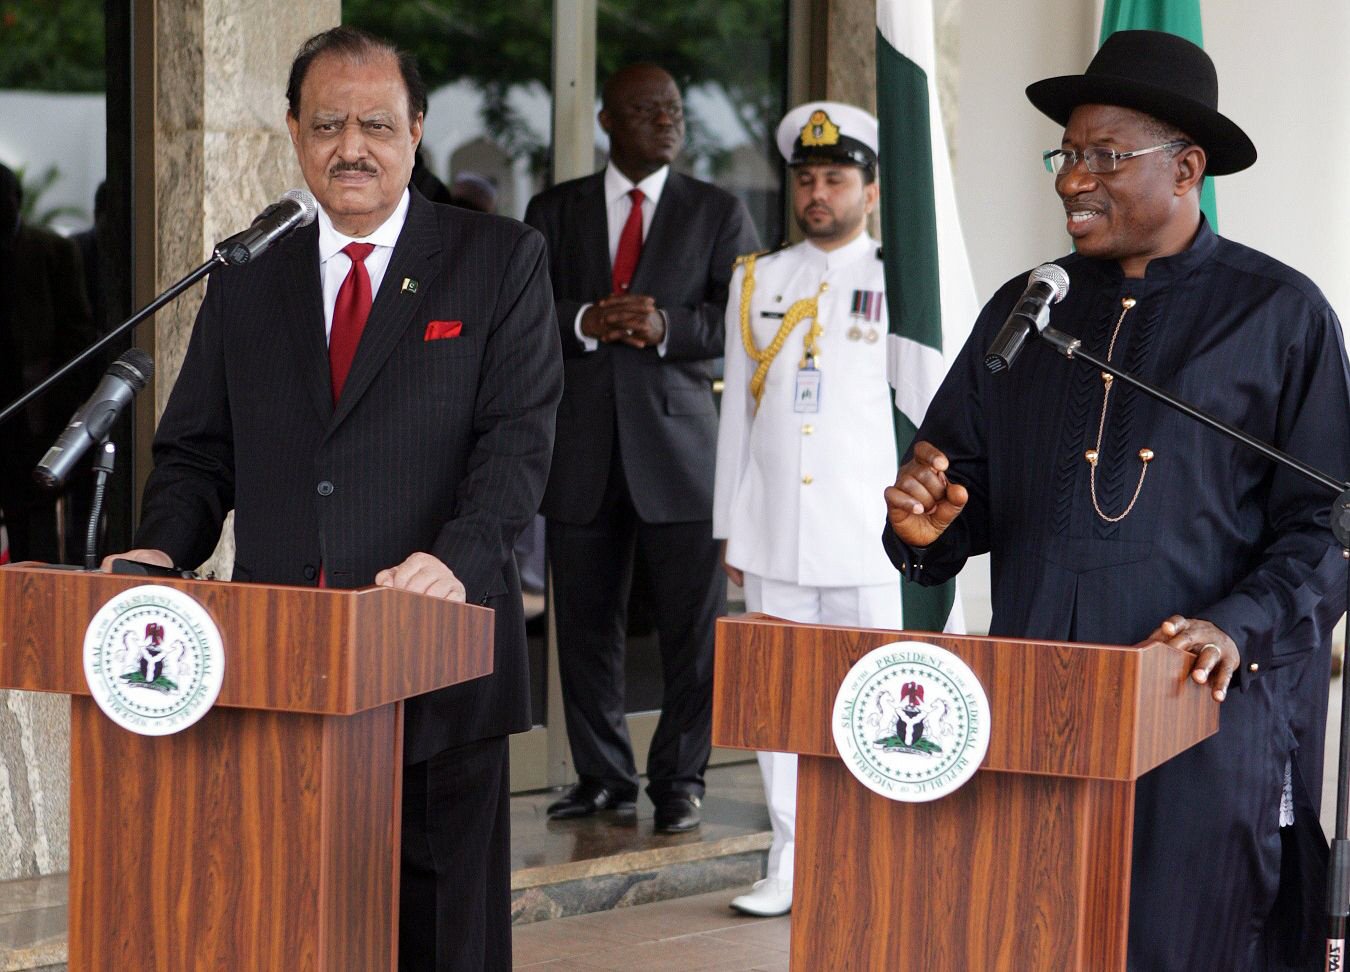 nigerian president goodluck jonathan r speaks alongside pakistani president mamnoon hussain l during a joint press conference in abuja nigeria on june 10 2014 photo afp